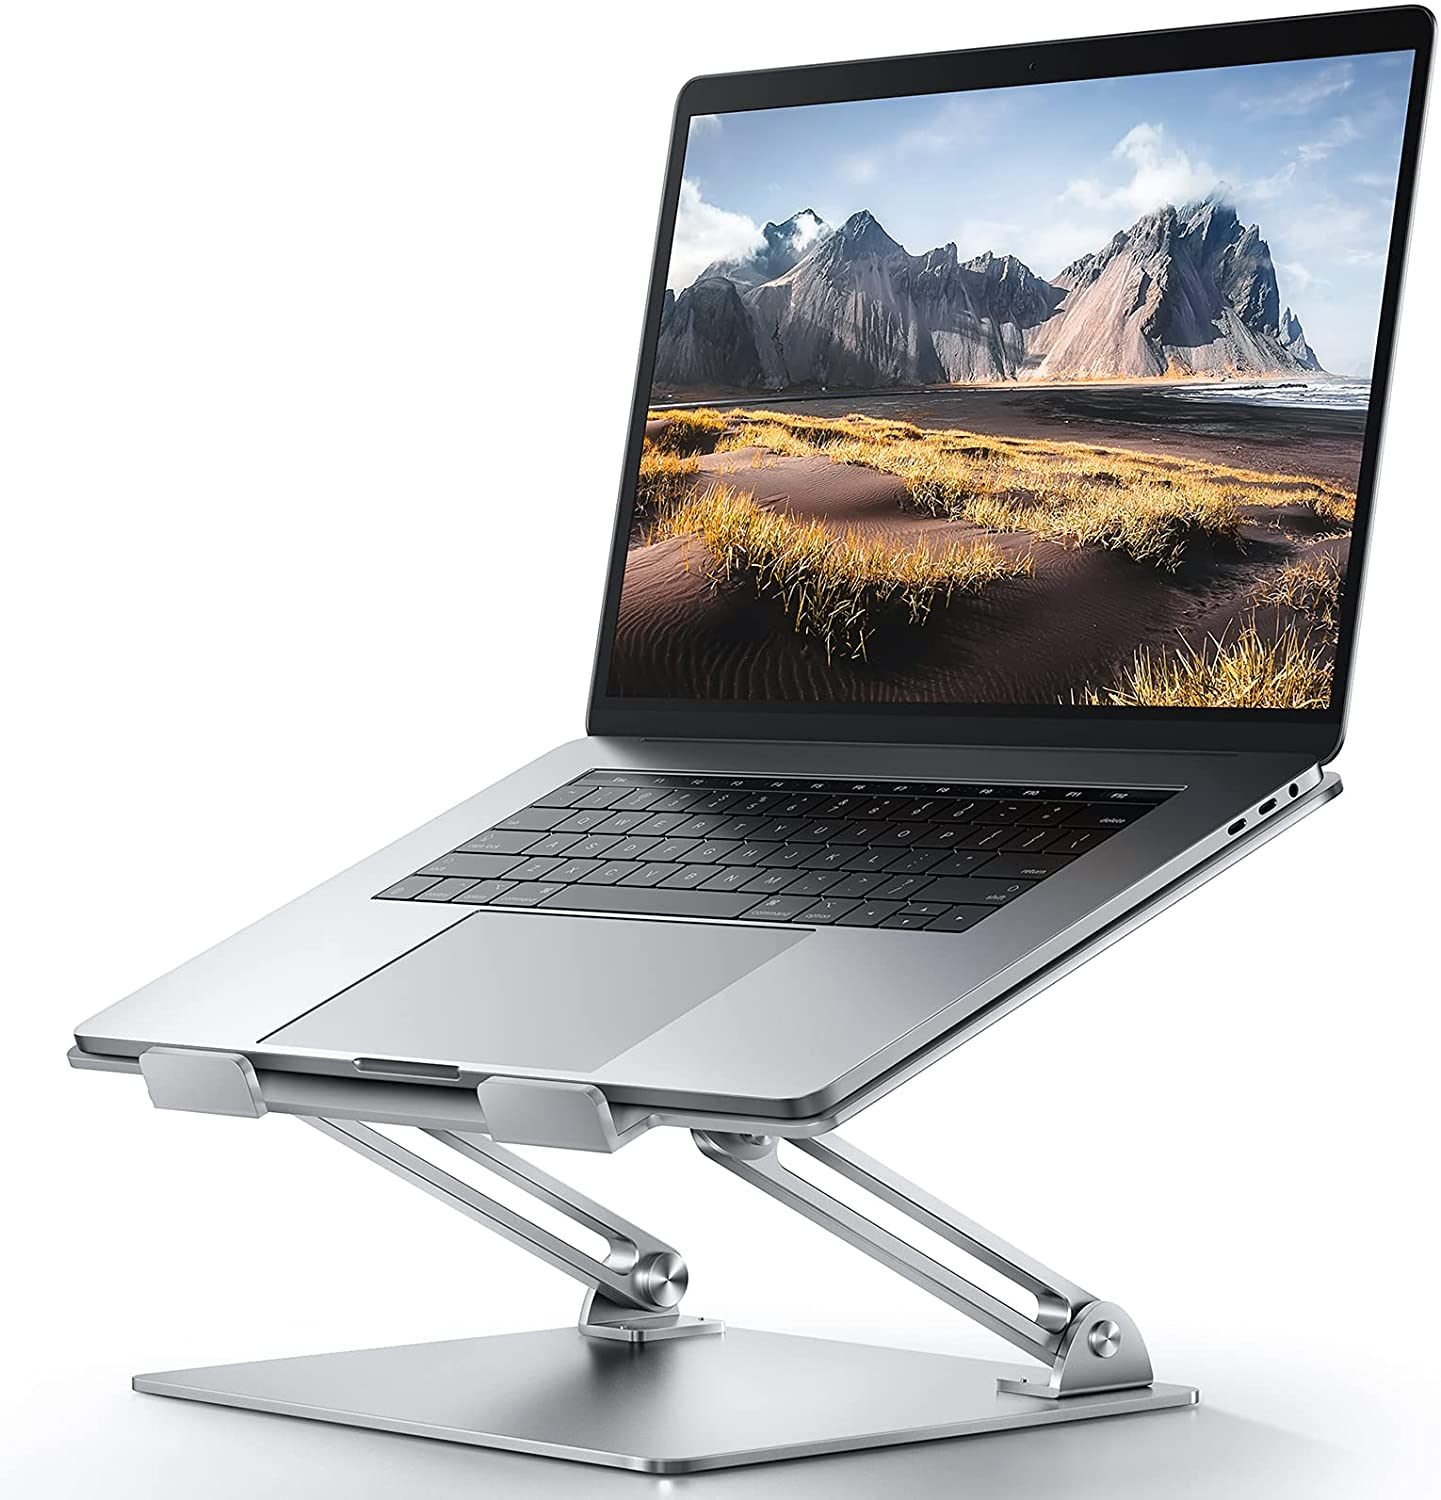 Adjustable Laptop Stand For Desk, Ergonomic Portable Computer Stand Aluminum Laptop Holder with Heat-Vent to Elevate Laptop, MacBook, Air, Pro, Dell XPS, Samsung, 11-17" All Laptop Stand Holder